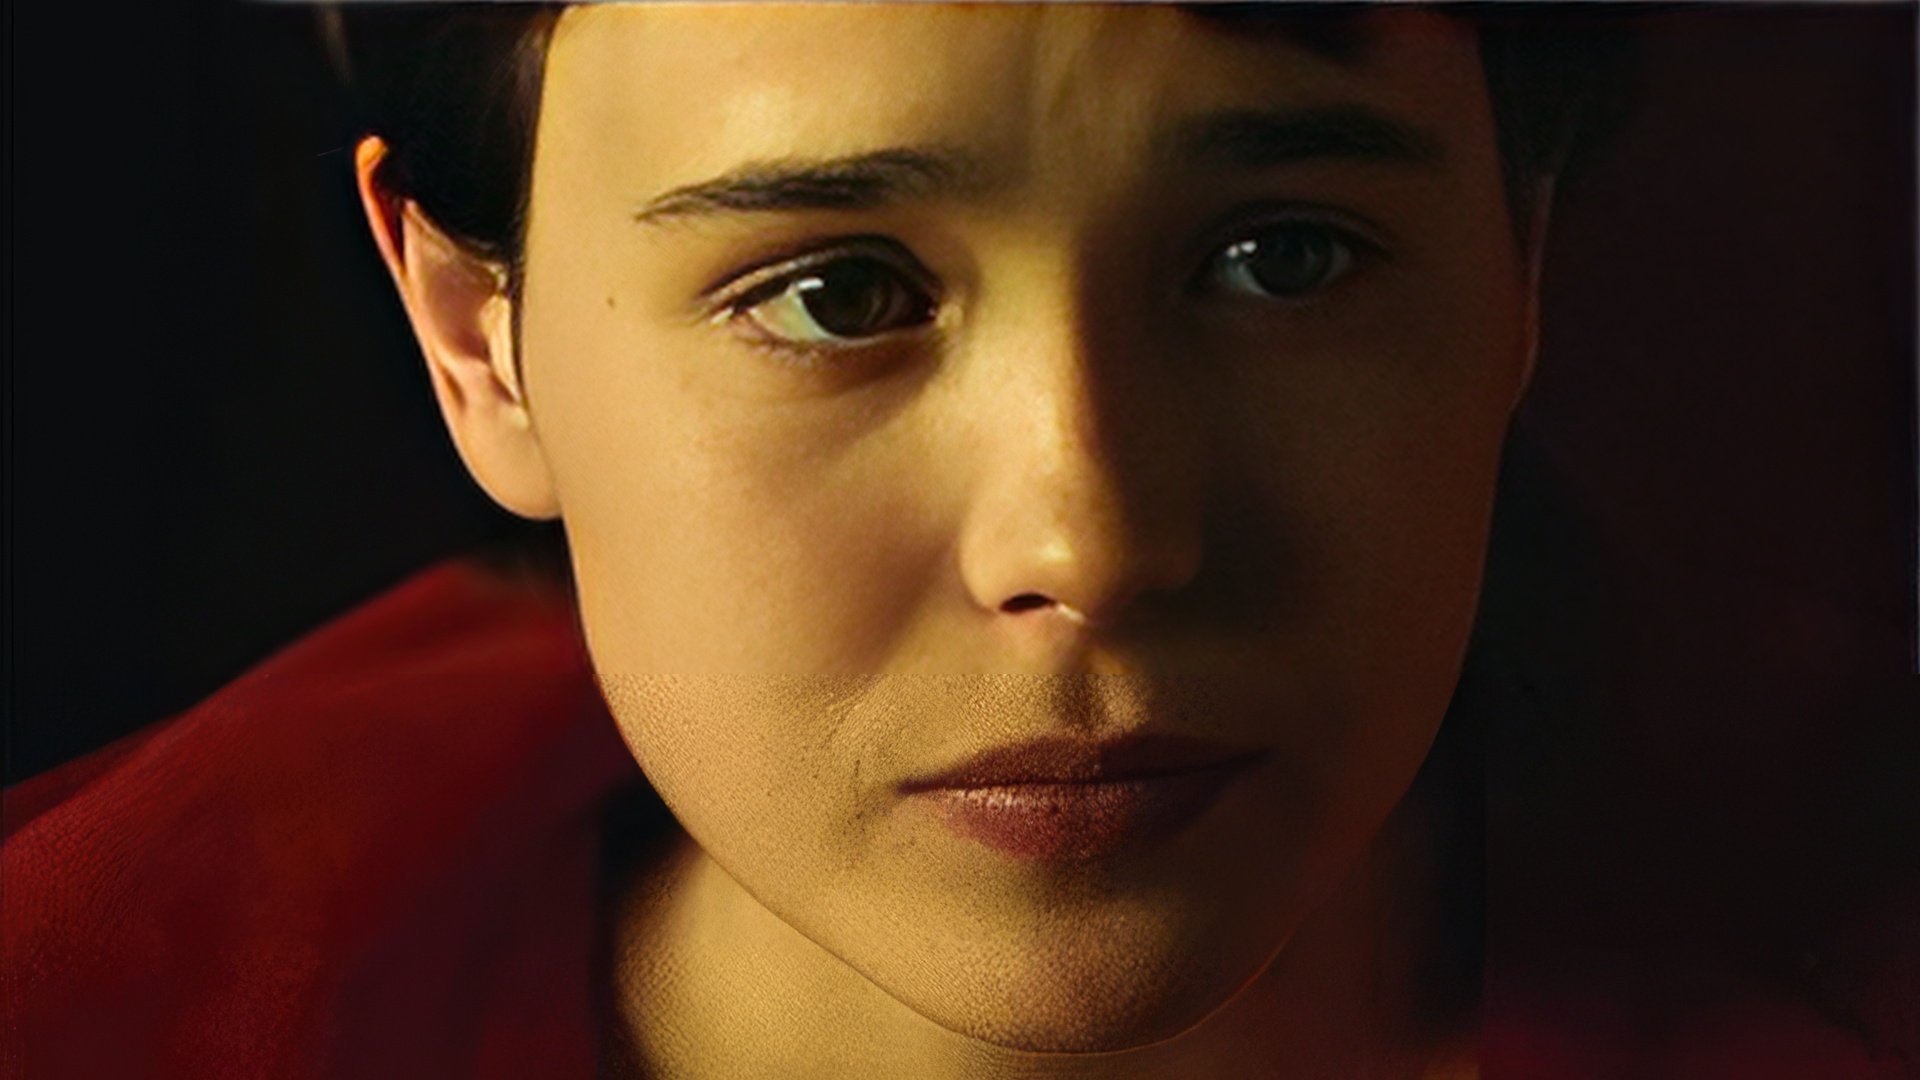 Ellen Page in the movie 'Hard Candy'